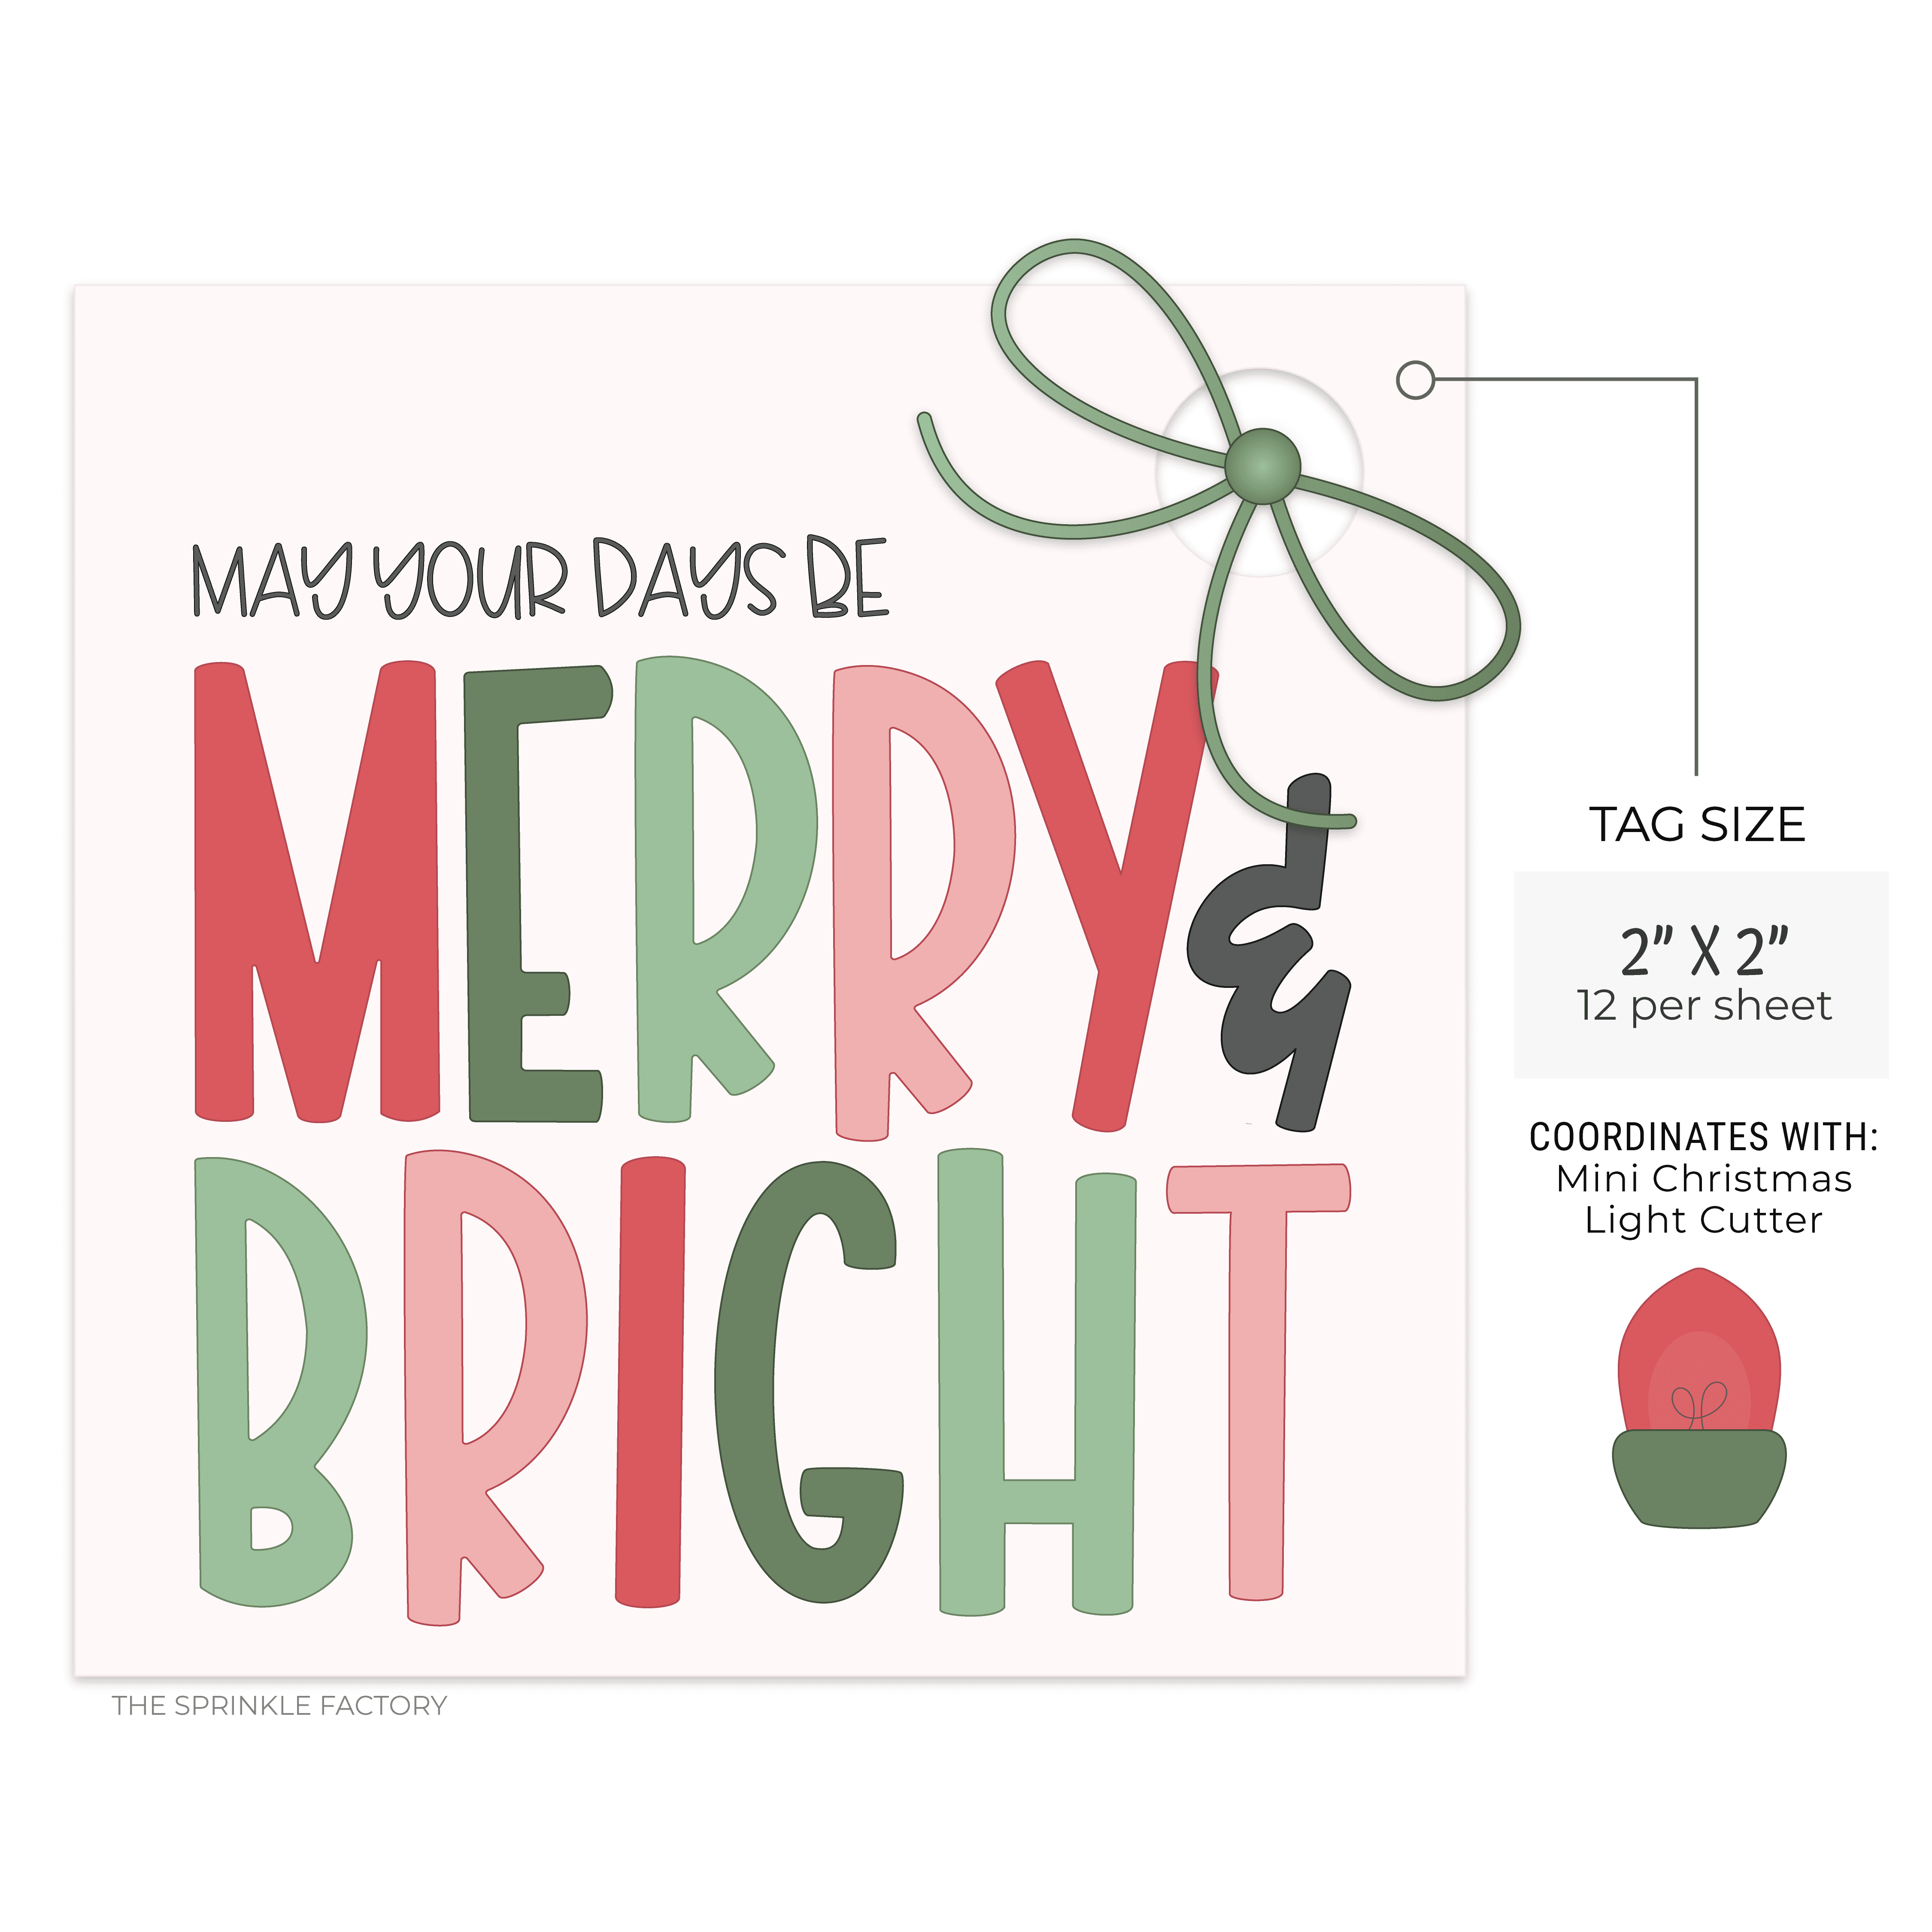 Image of a digital tag with the words may your days be merry and bright on it with a green bow.